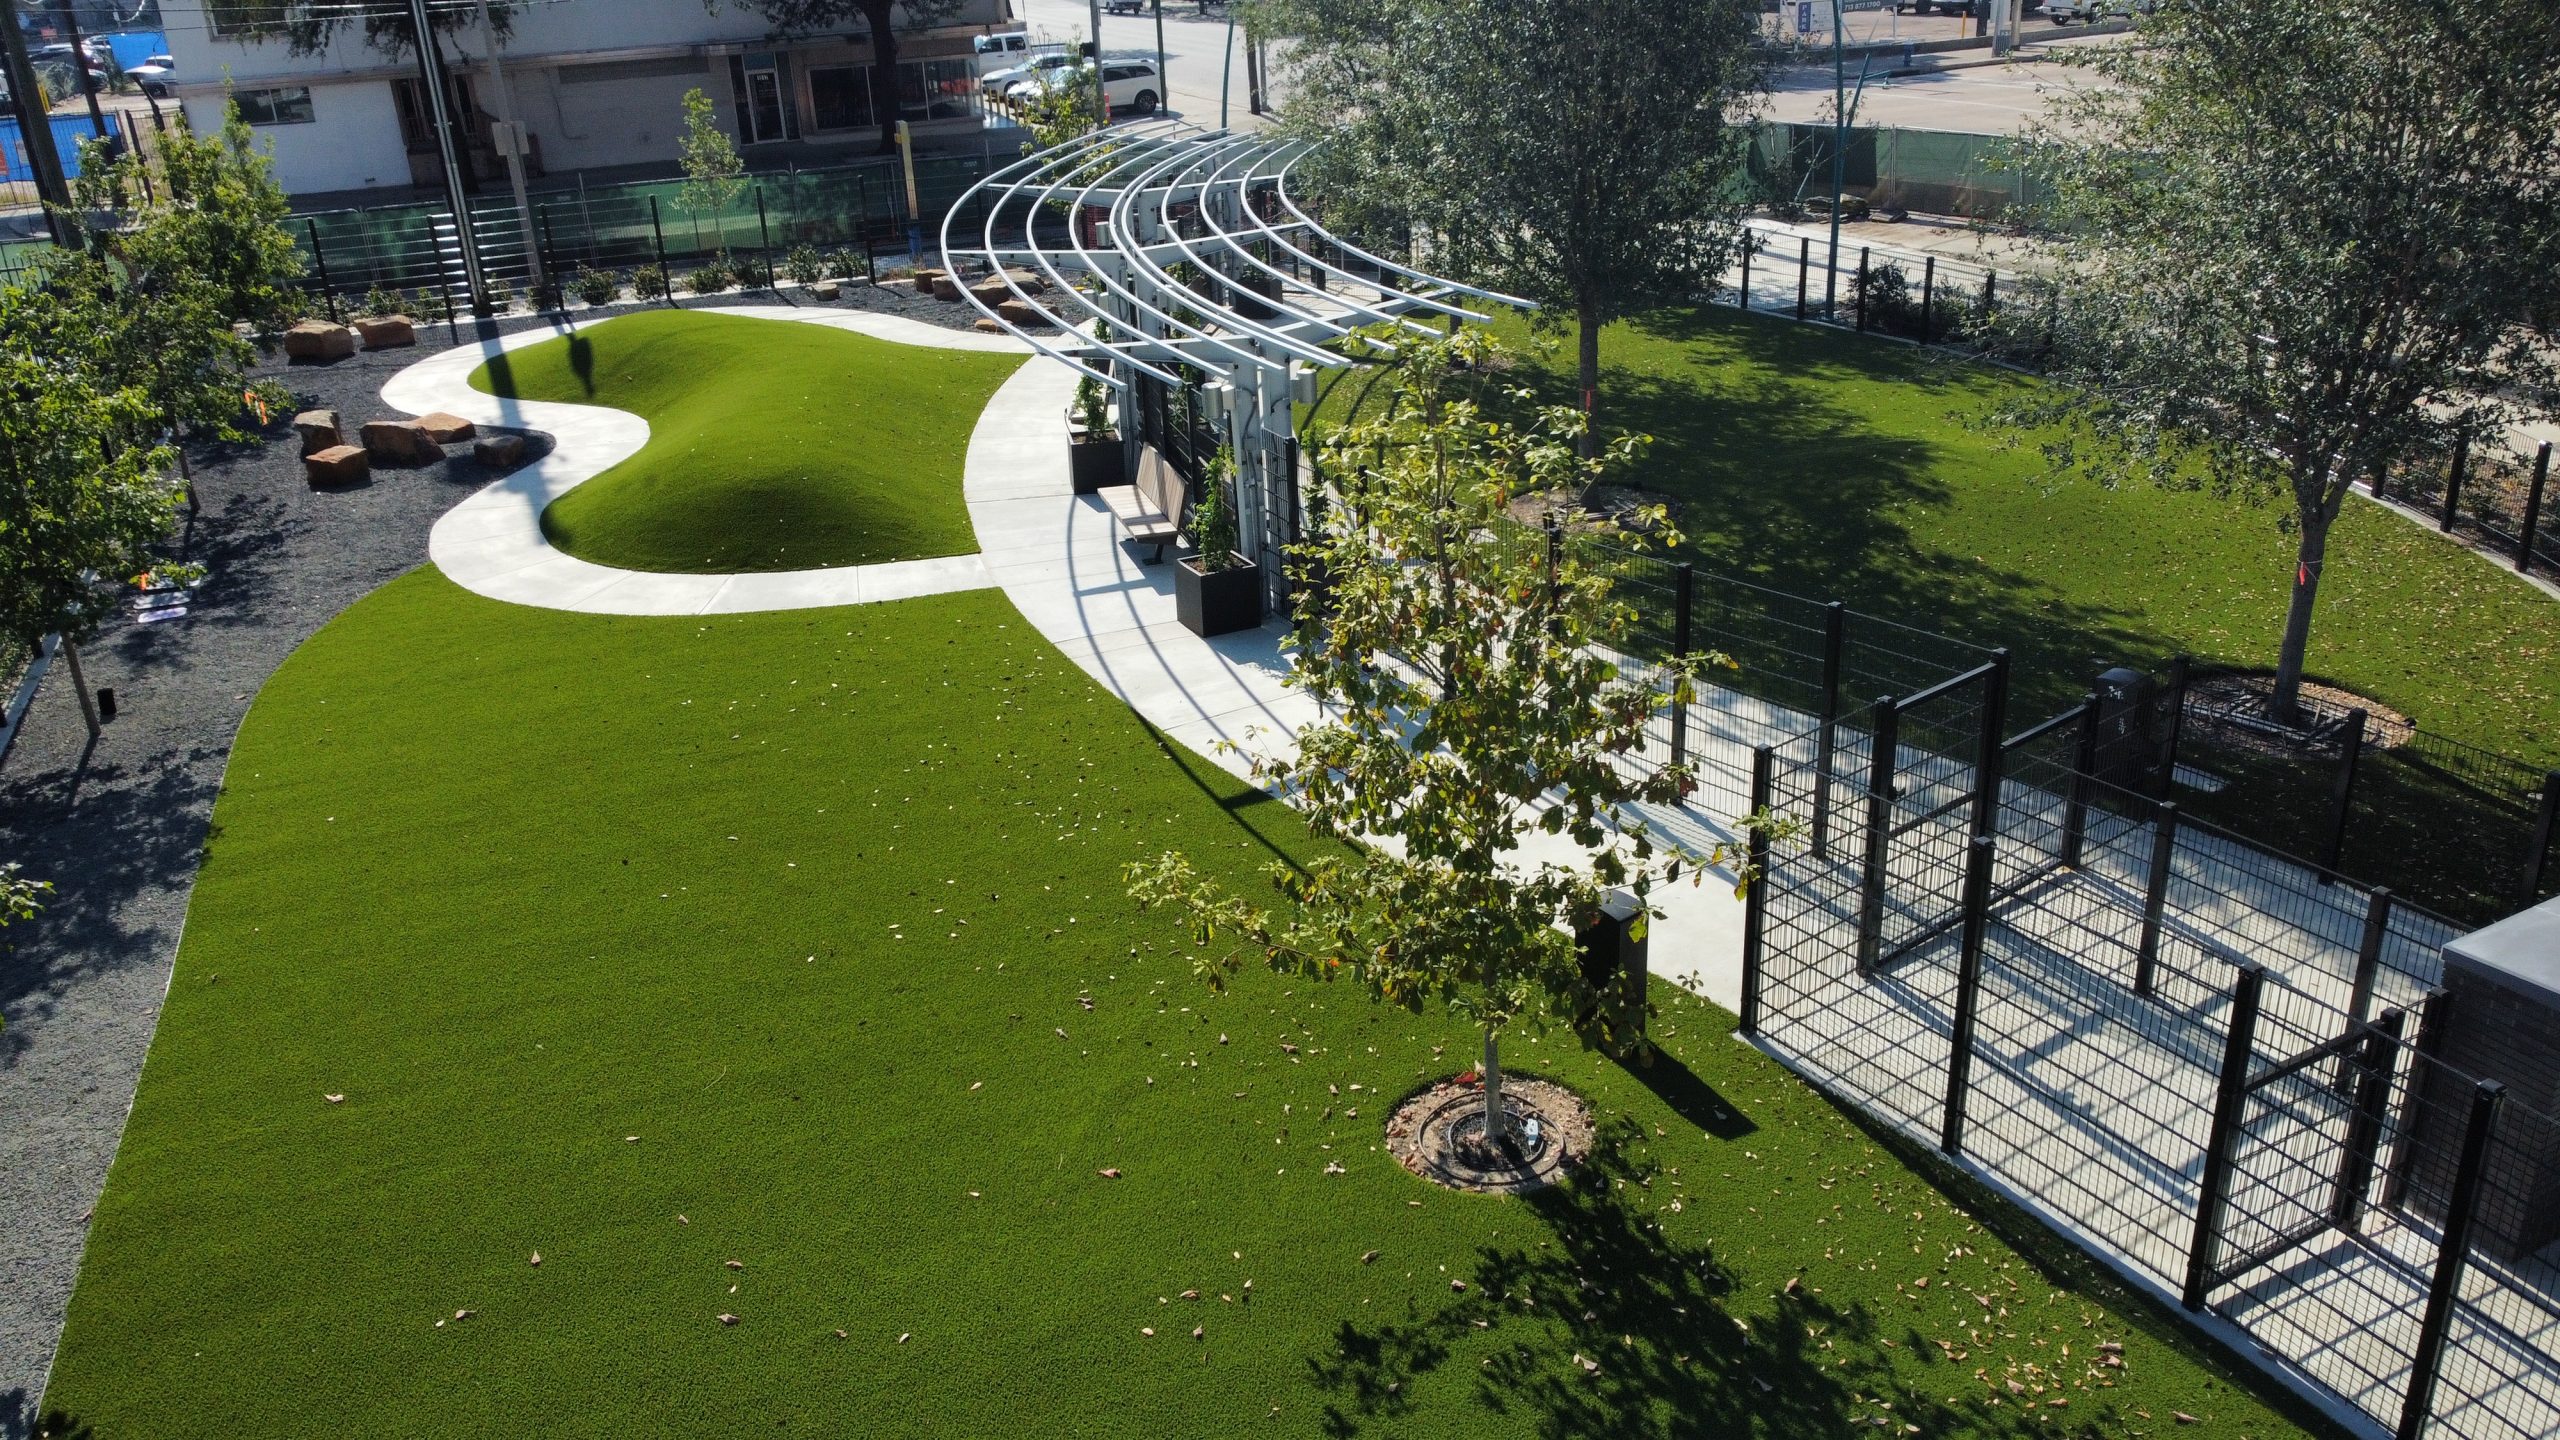 Commercial artificial grass dogpark from SYNLawn Bay Area